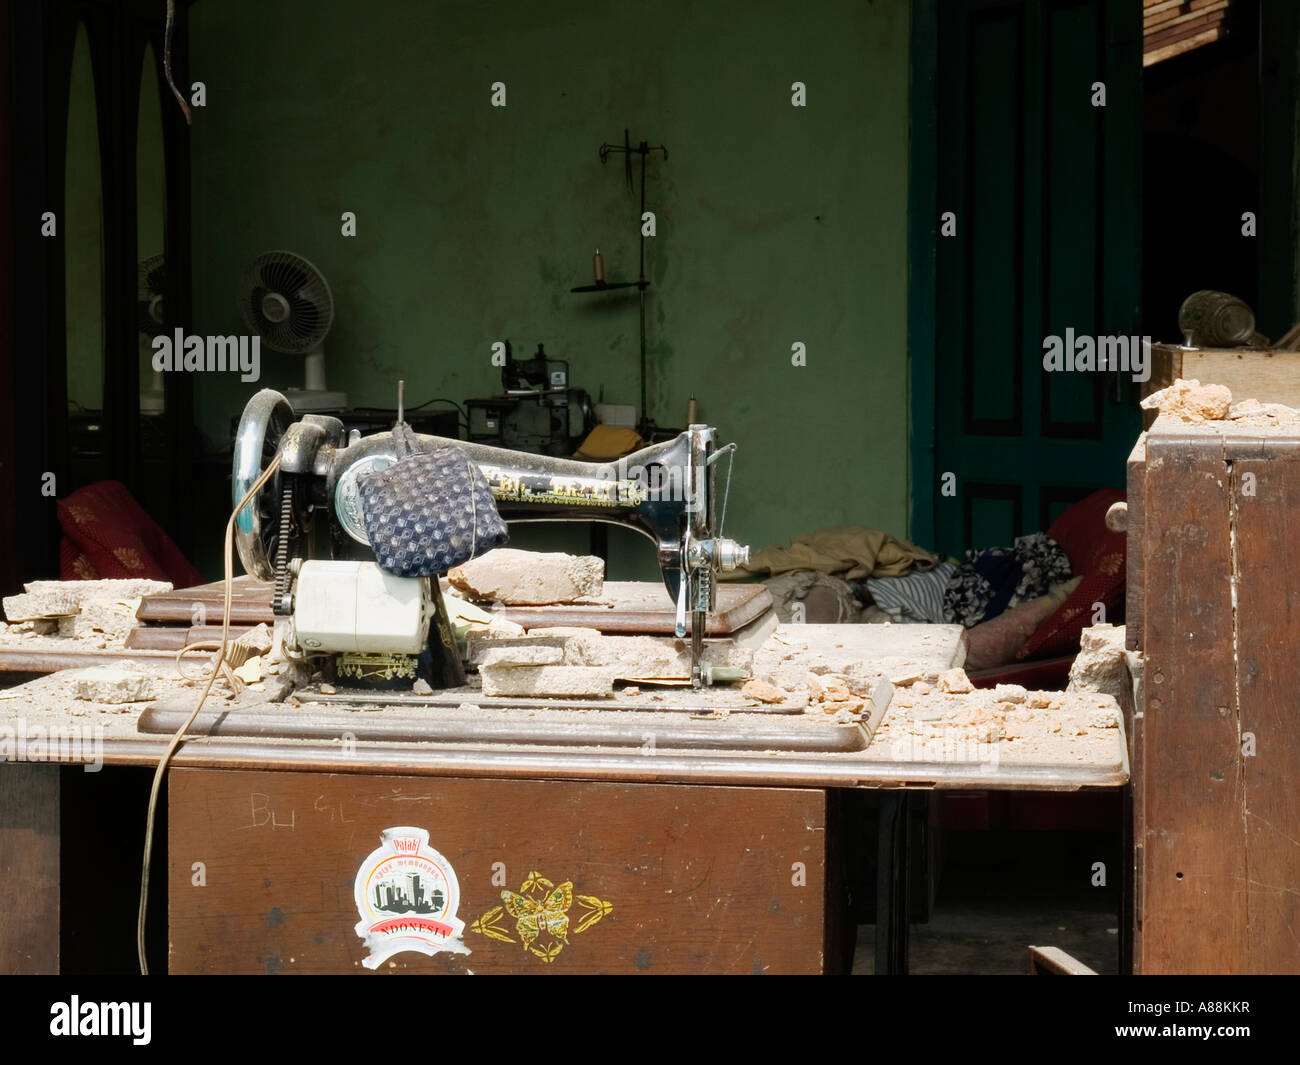 Sewing machine on rubble strewn table hours after the devastating May 2006 earthquake,Yogyakarta,Java,Indonesia. Stock Photo